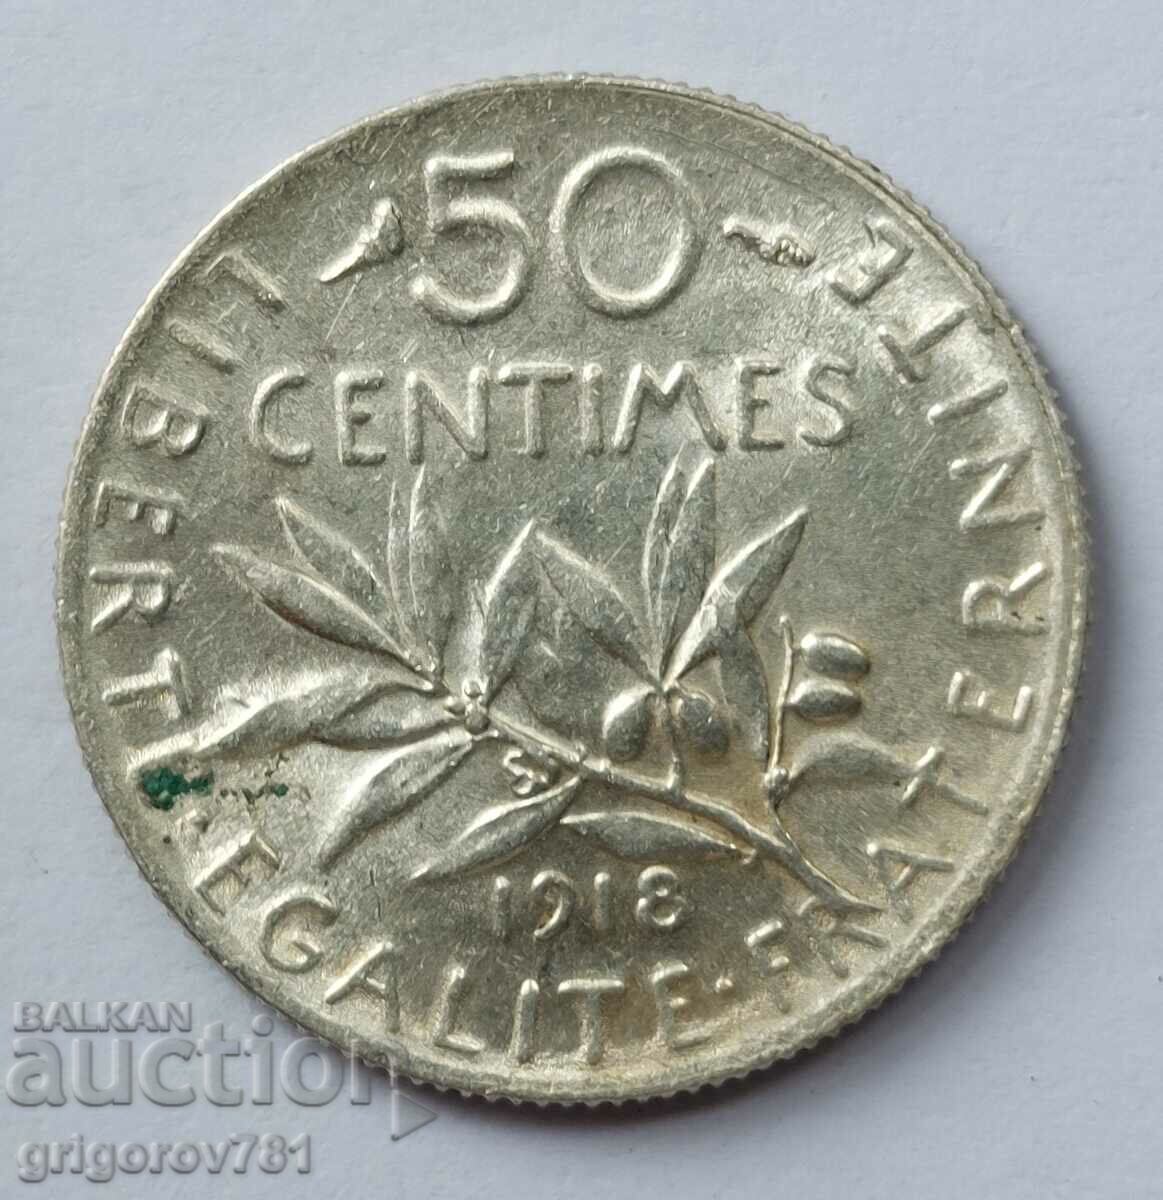 50 centimes silver France 1918 - silver coin №67